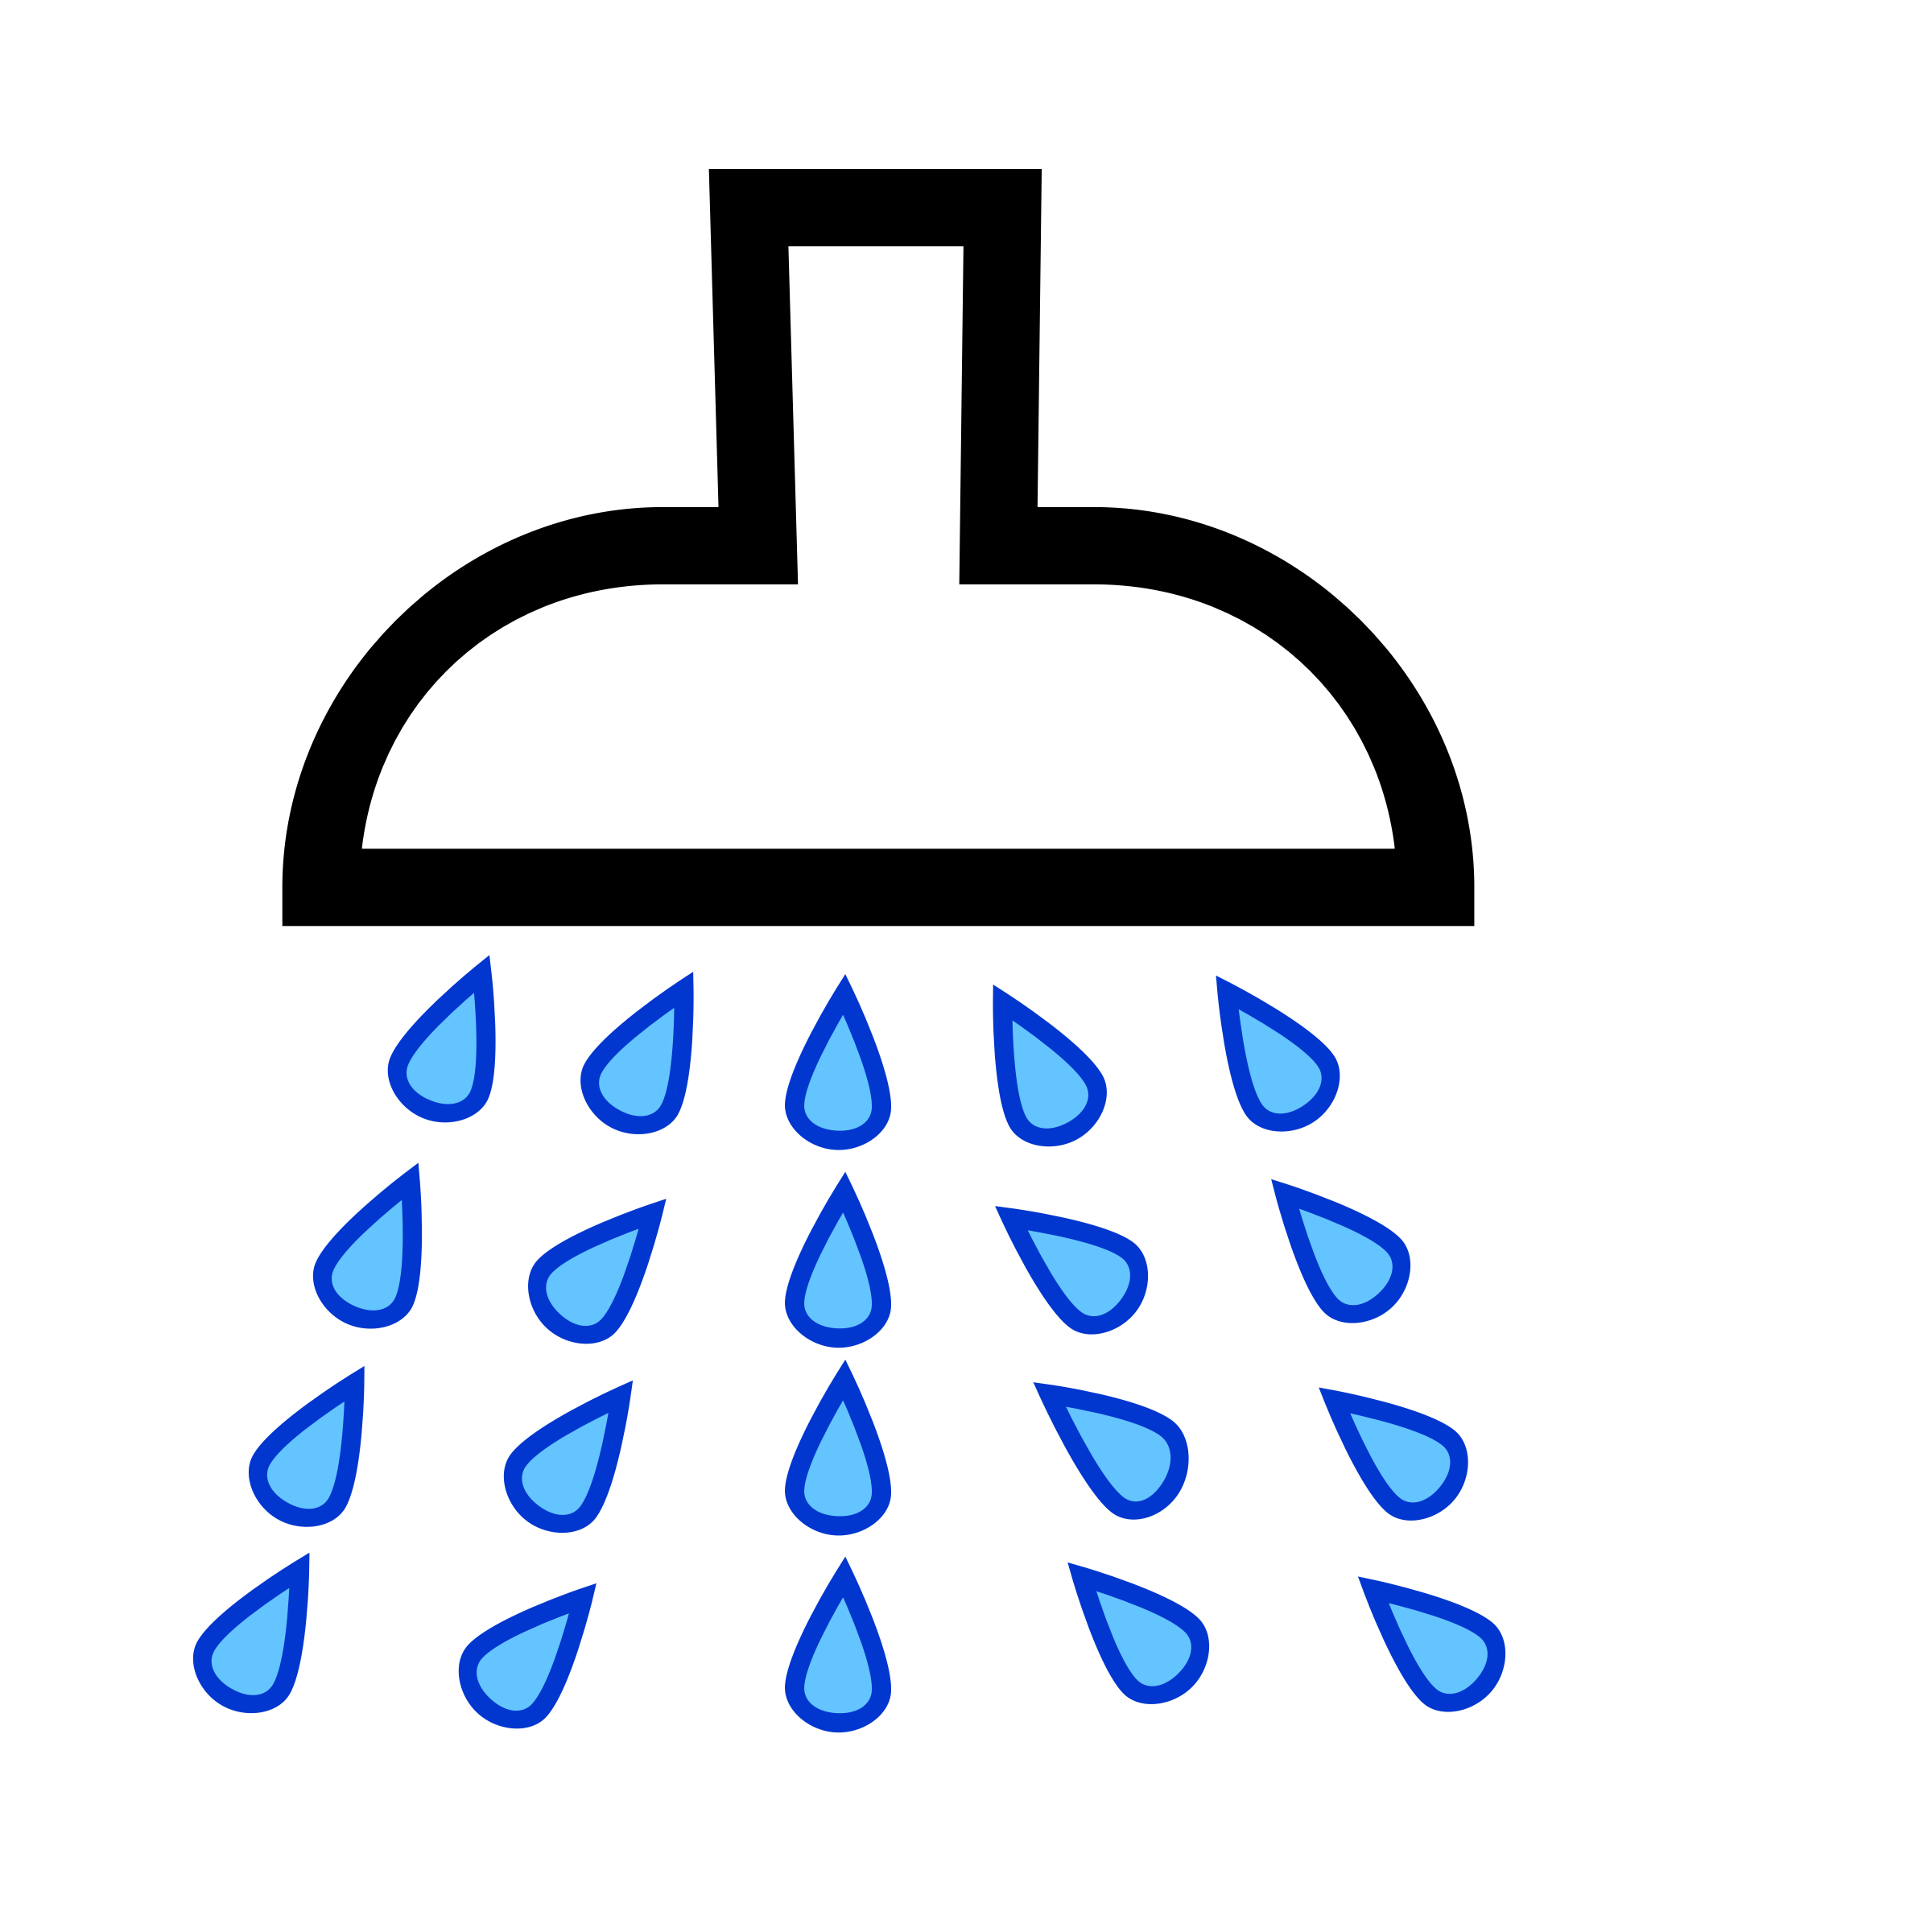 showering clipart shower water